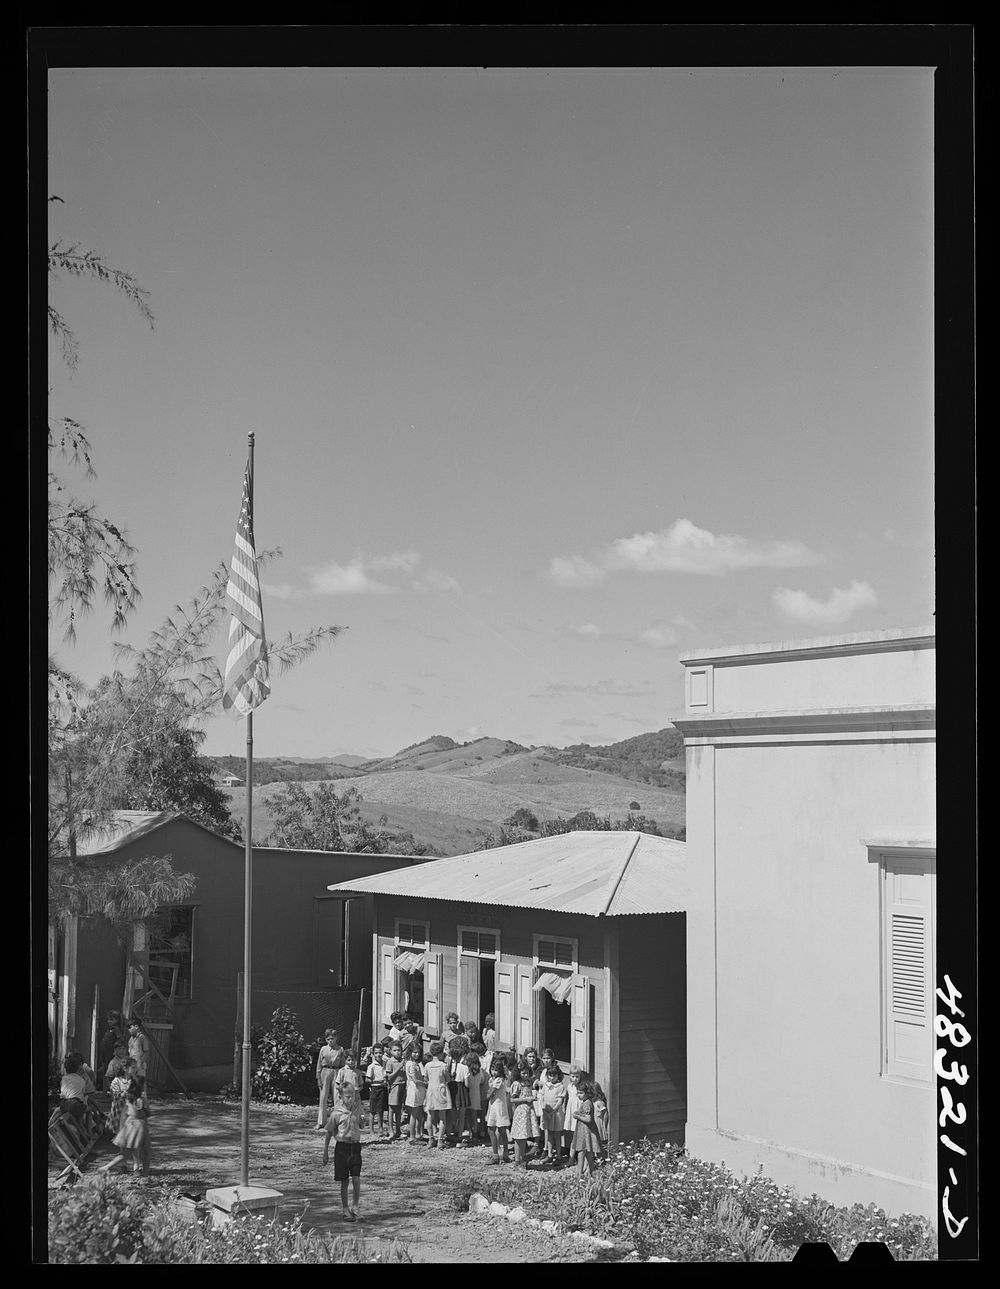 [Untitled photo, possibly related to: Aibonito (vicinity), Puerto Rico. A schoolhouse]. Sourced from the Library of Congress.